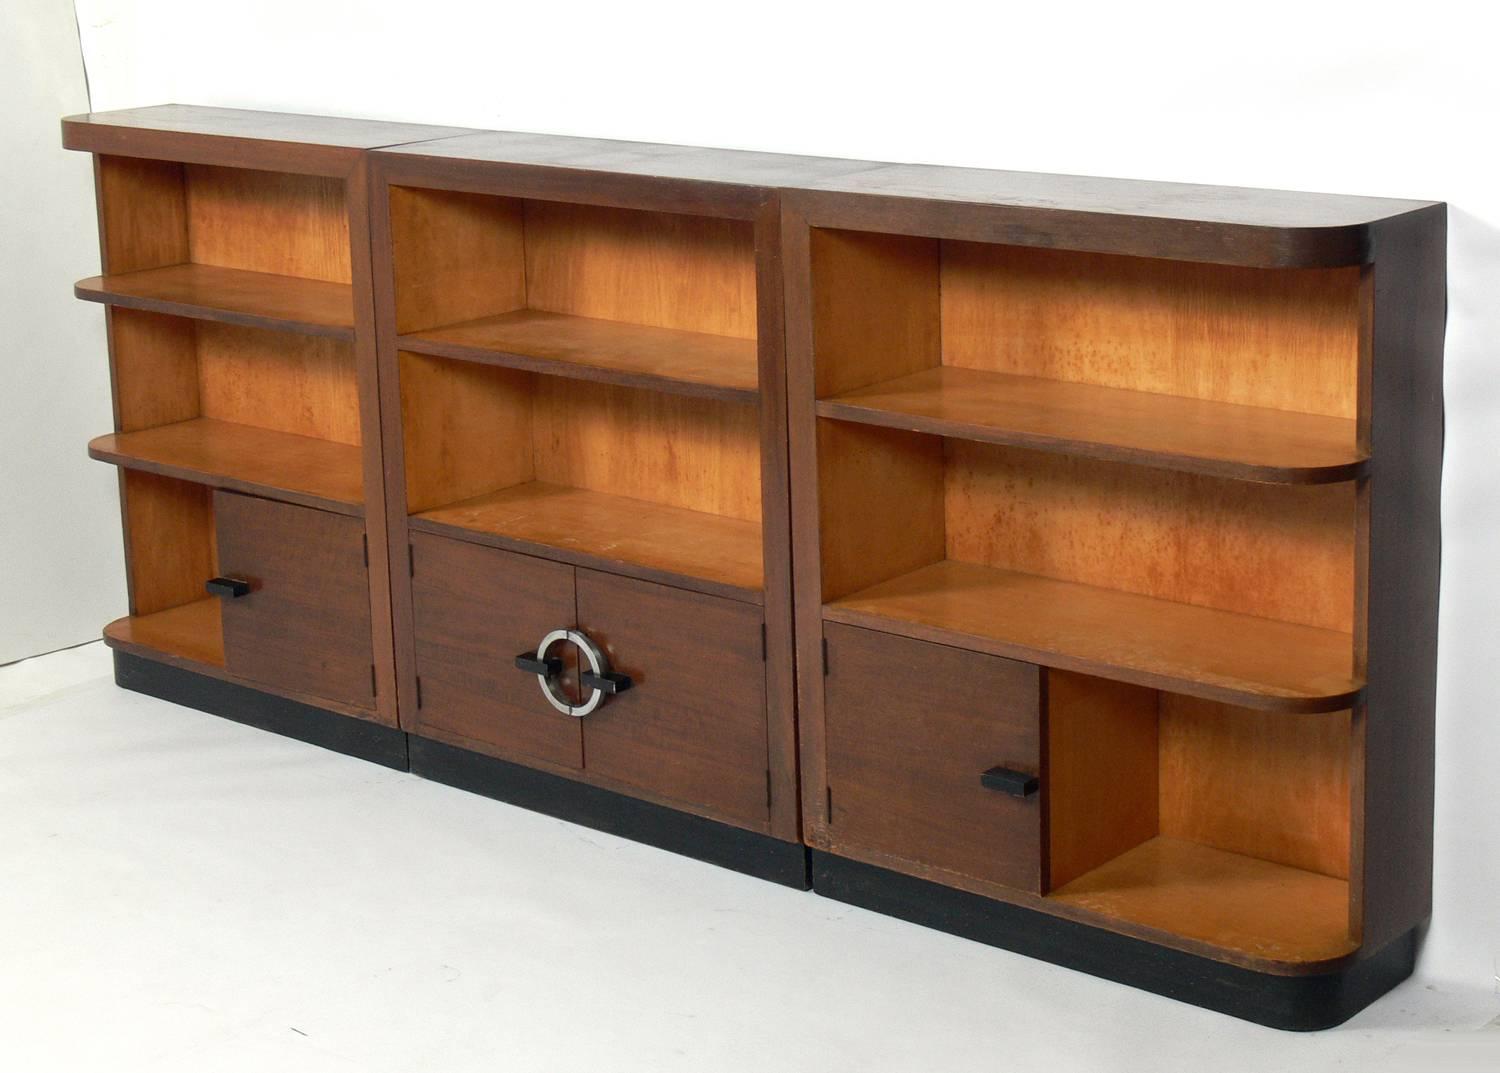 Group of streamlined Art Deco cabinets by gilbert Rhode for Herman Miller, circa 1930s. Constructed of exotic east India laurel and walnut. These cabinets are currently being refinished and will look incredible when completed. The price noted below